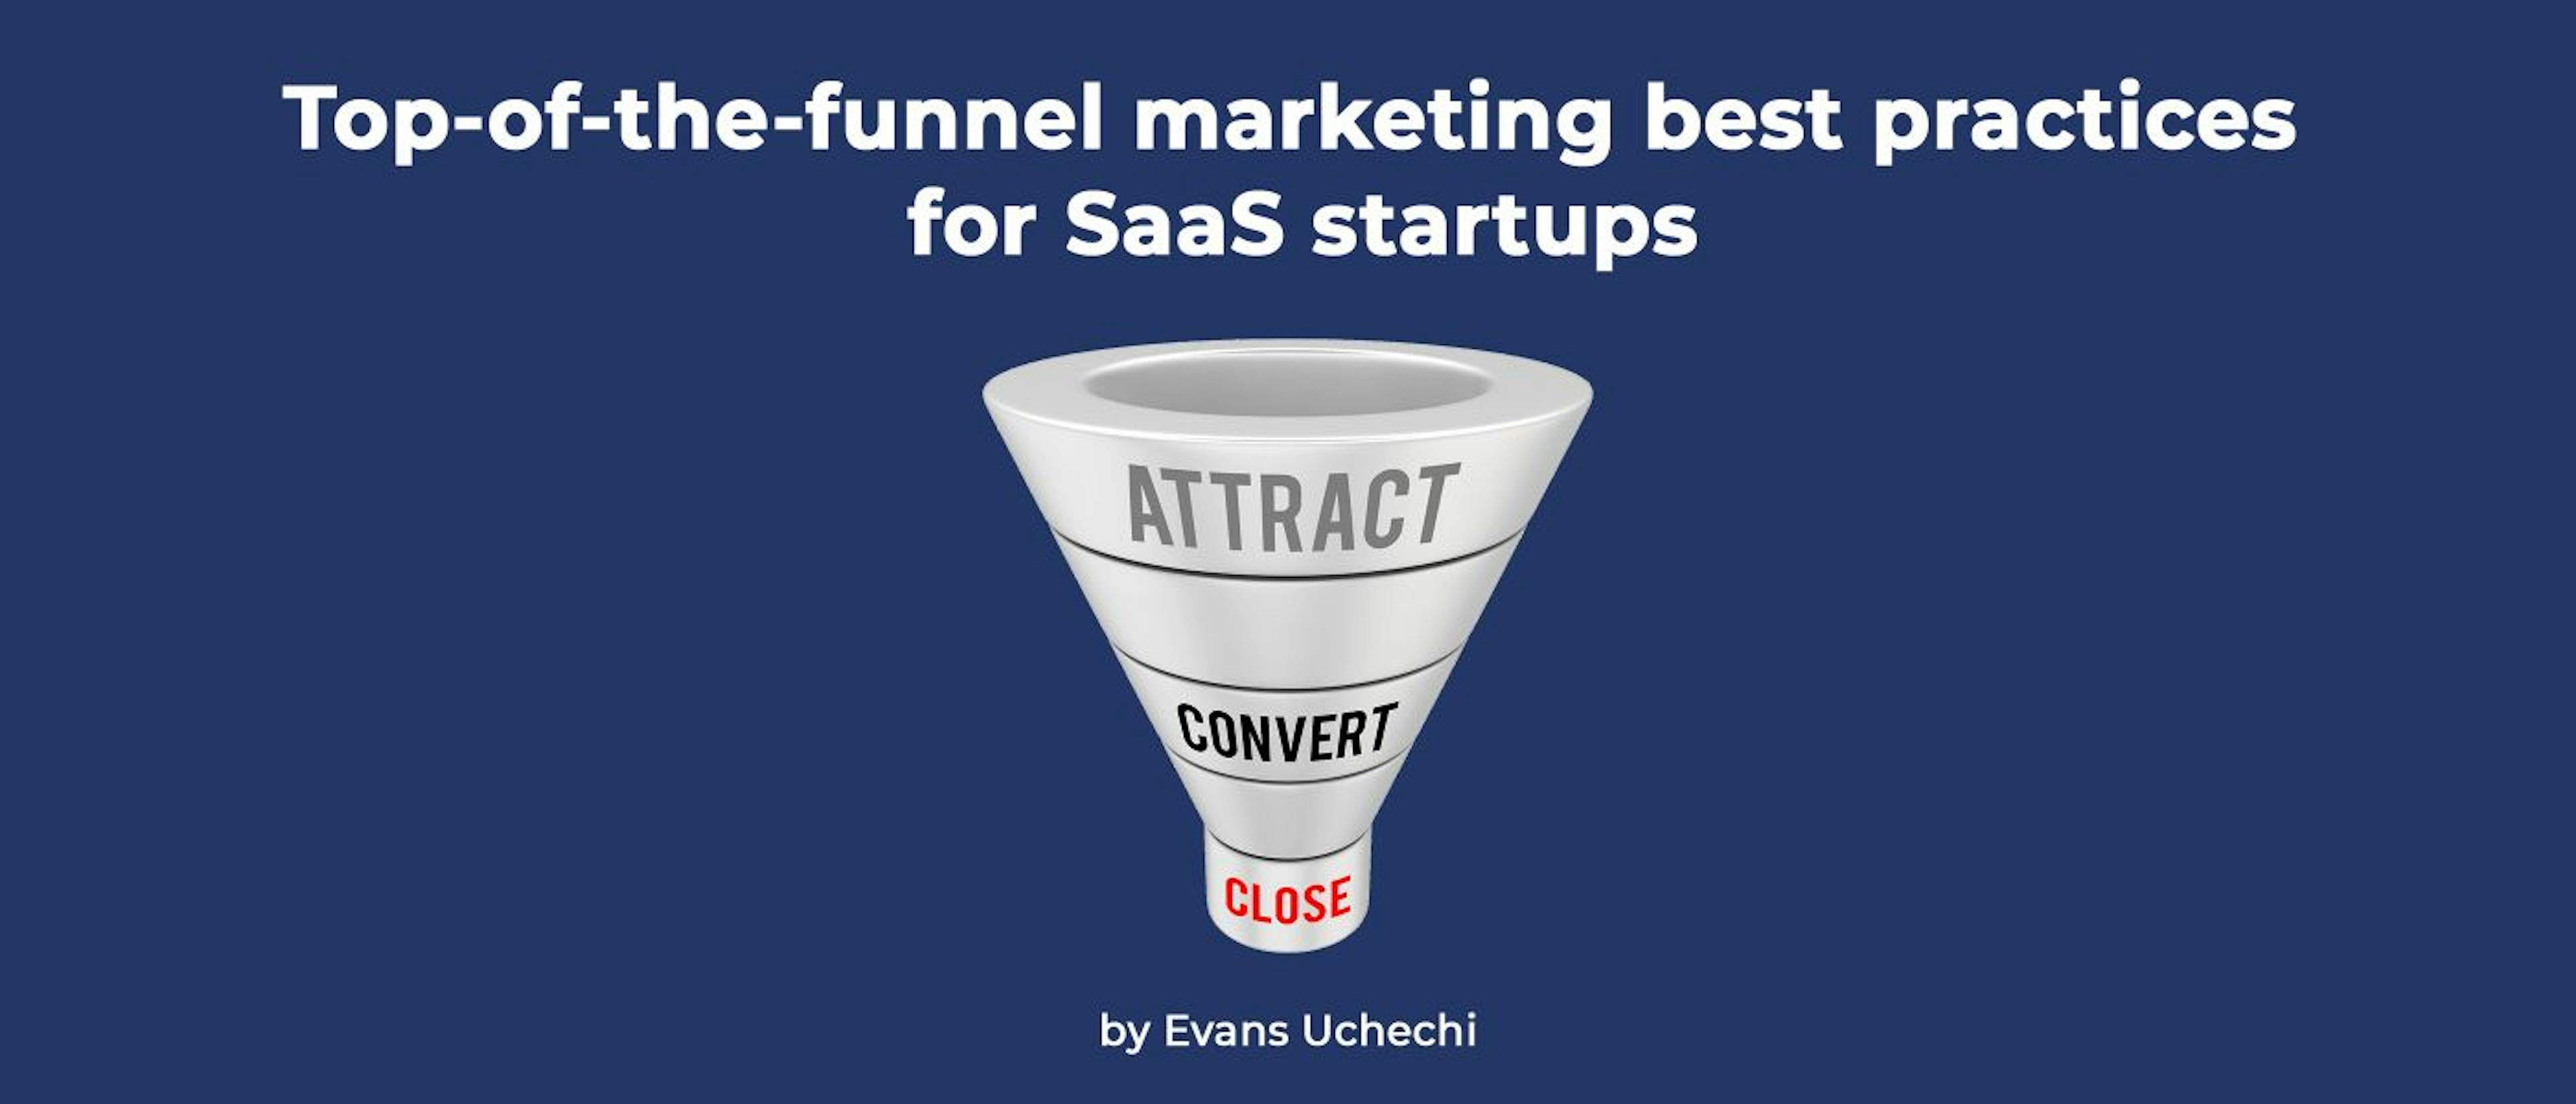 featured image - Top-of-funnel Marketing Best Practices for SaaS Startups